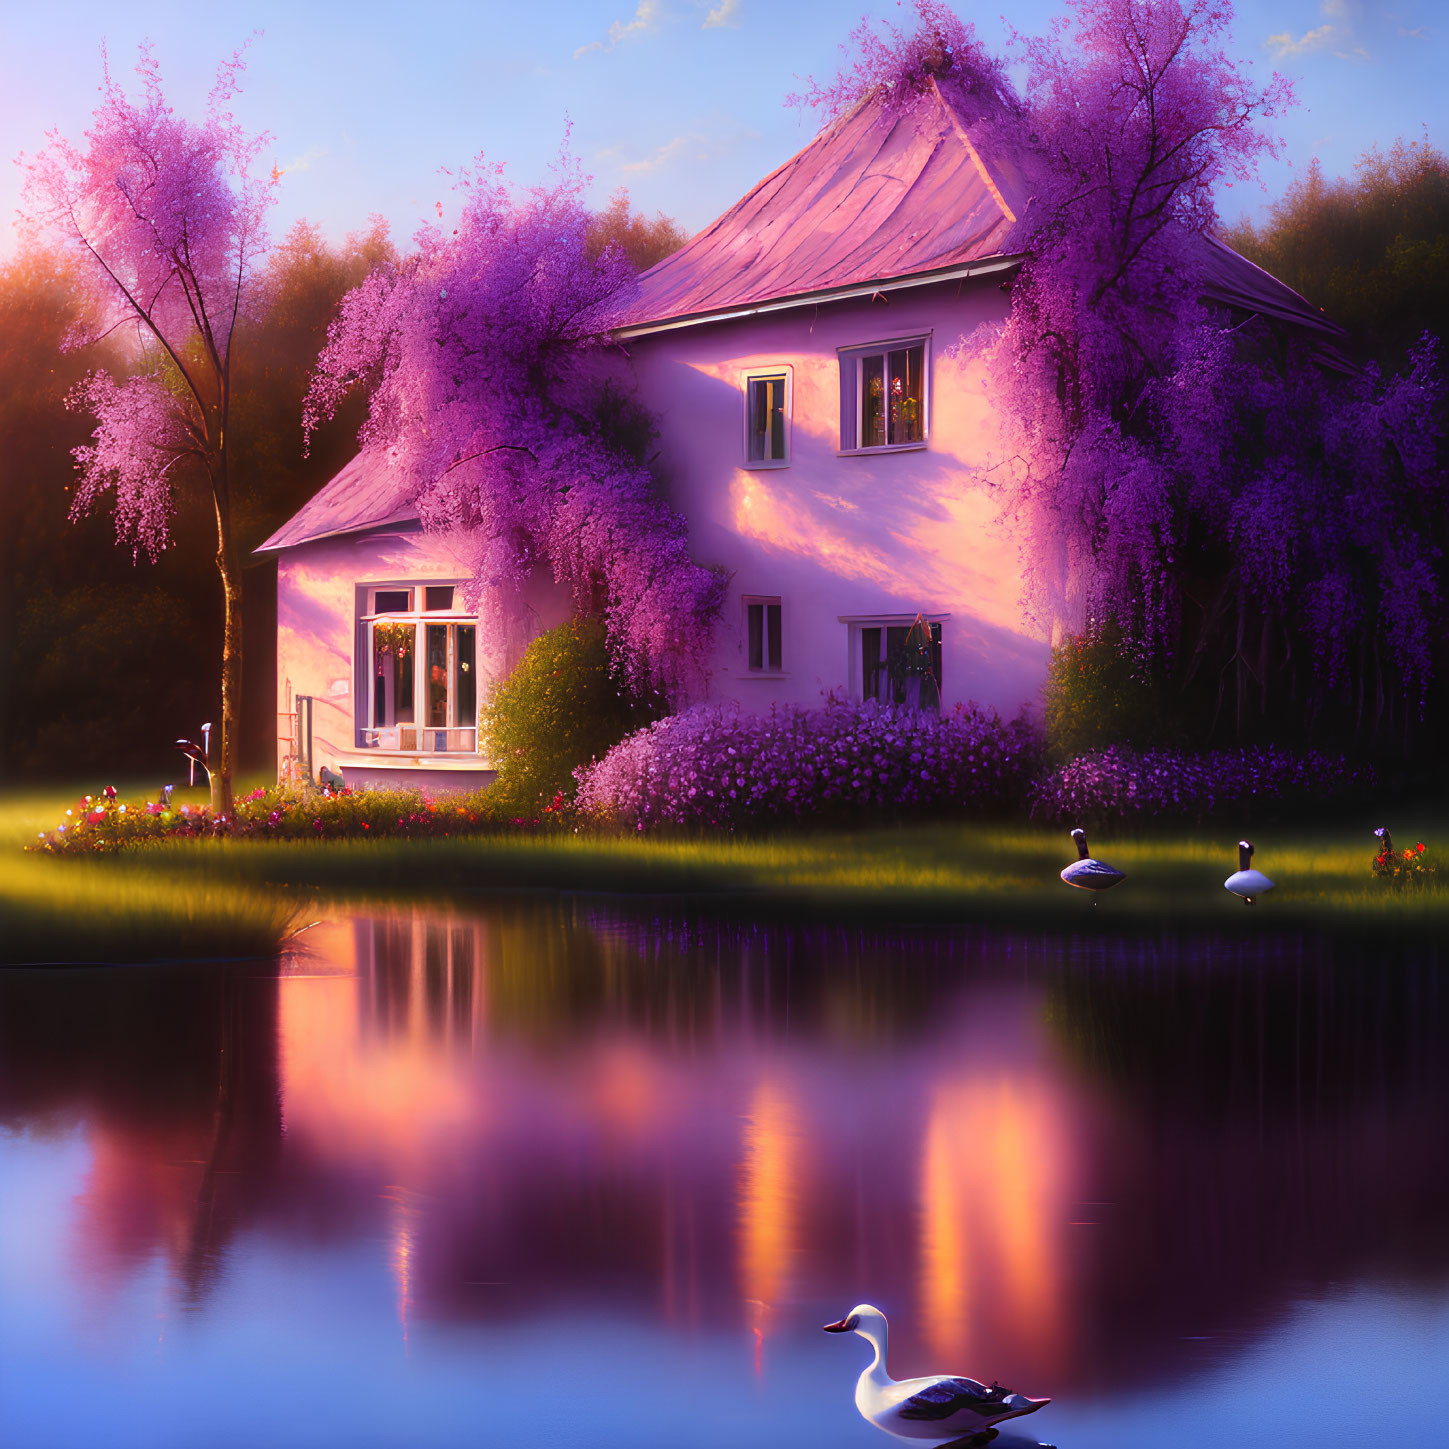 Tranquil two-story house with blooming wisteria and pond scene